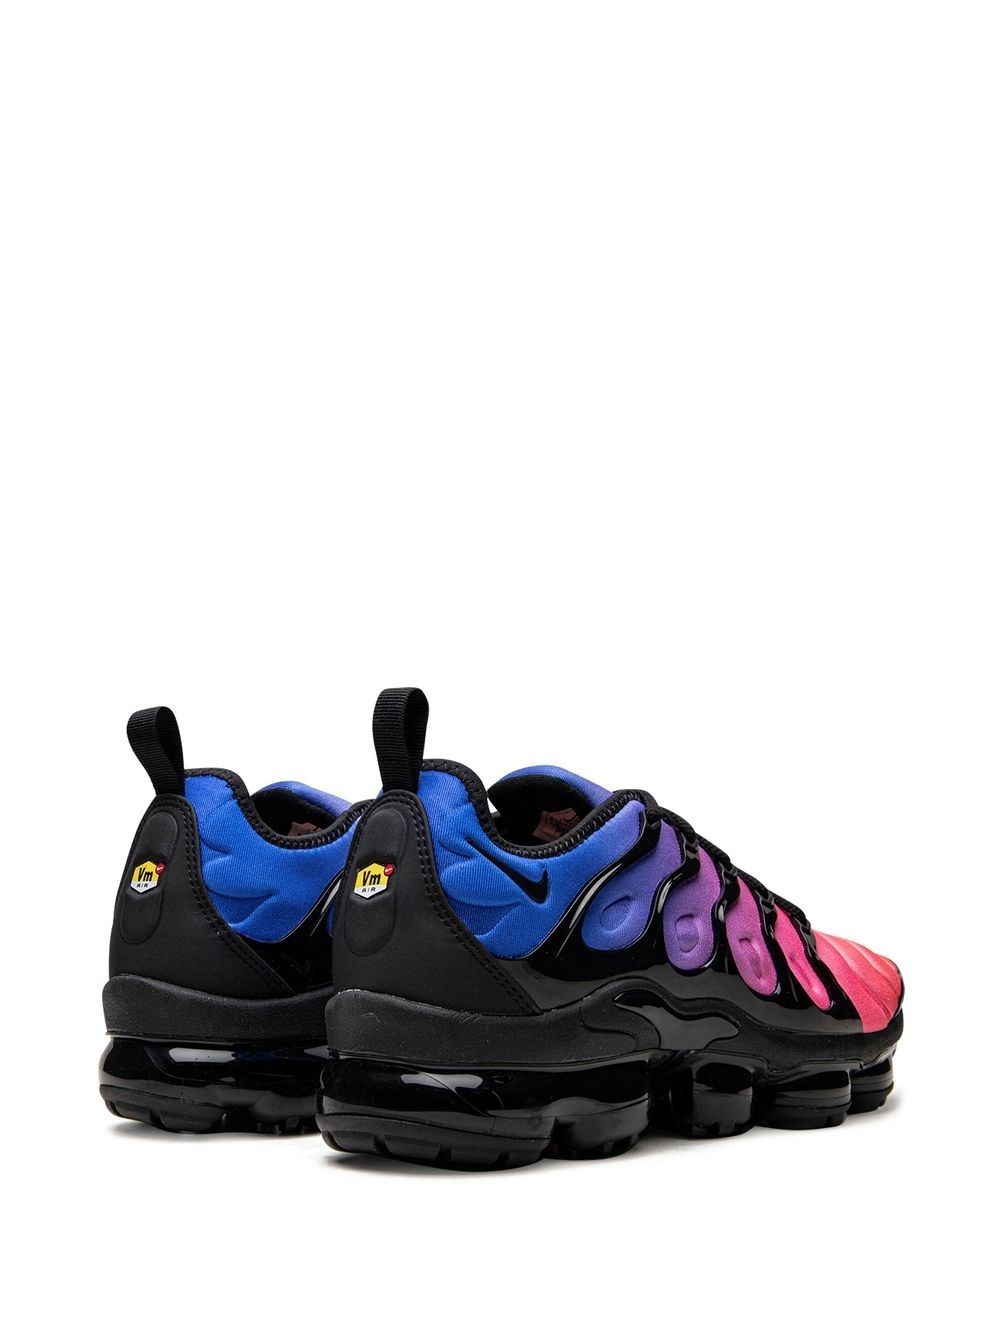 Air Vapormax Plus "Cotton Candy" sneakers - 3